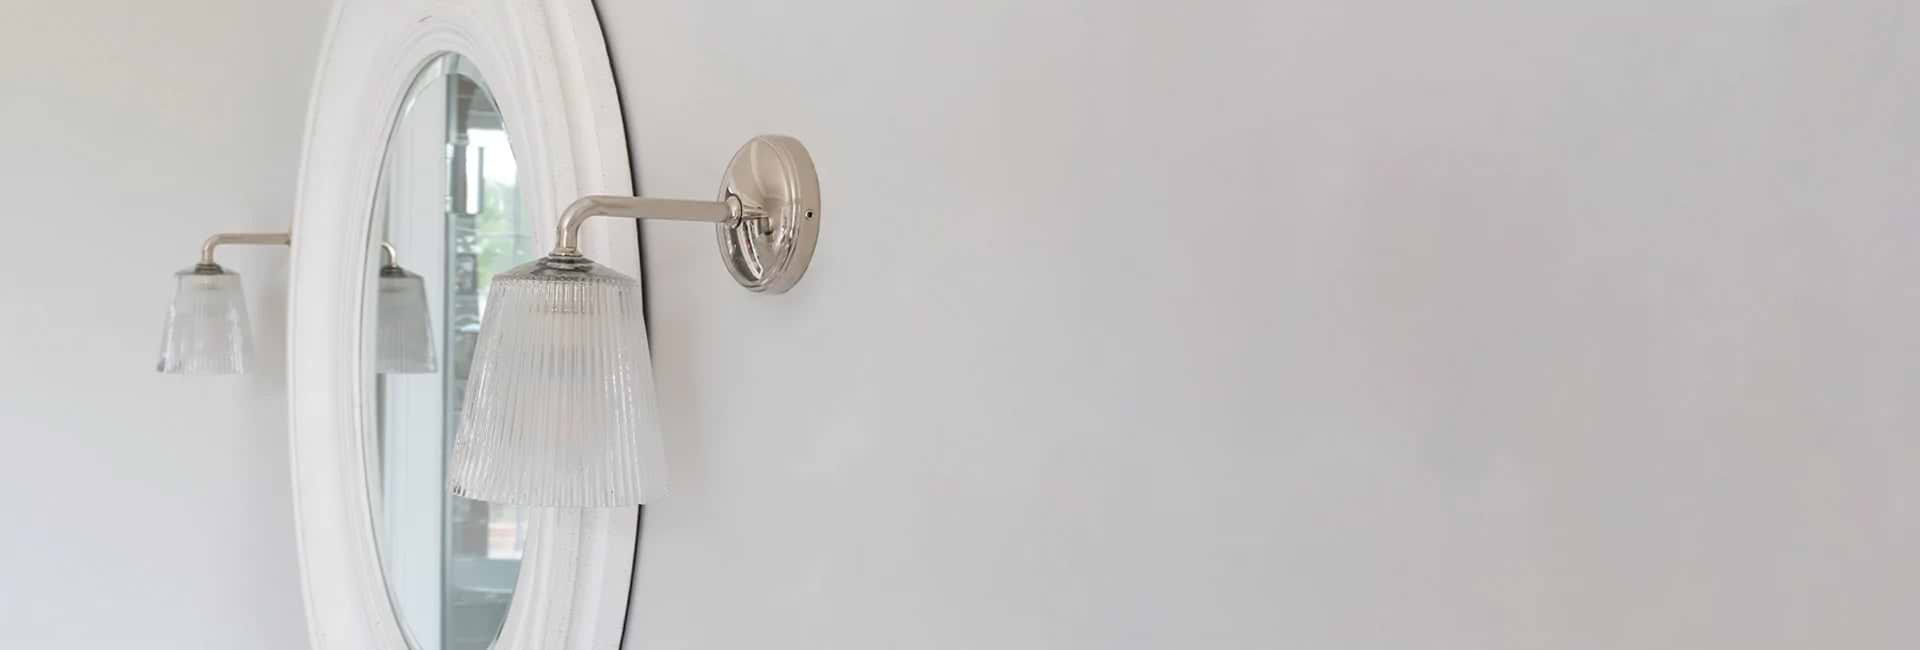 Polished Nickel wall light next to mirror on white wall